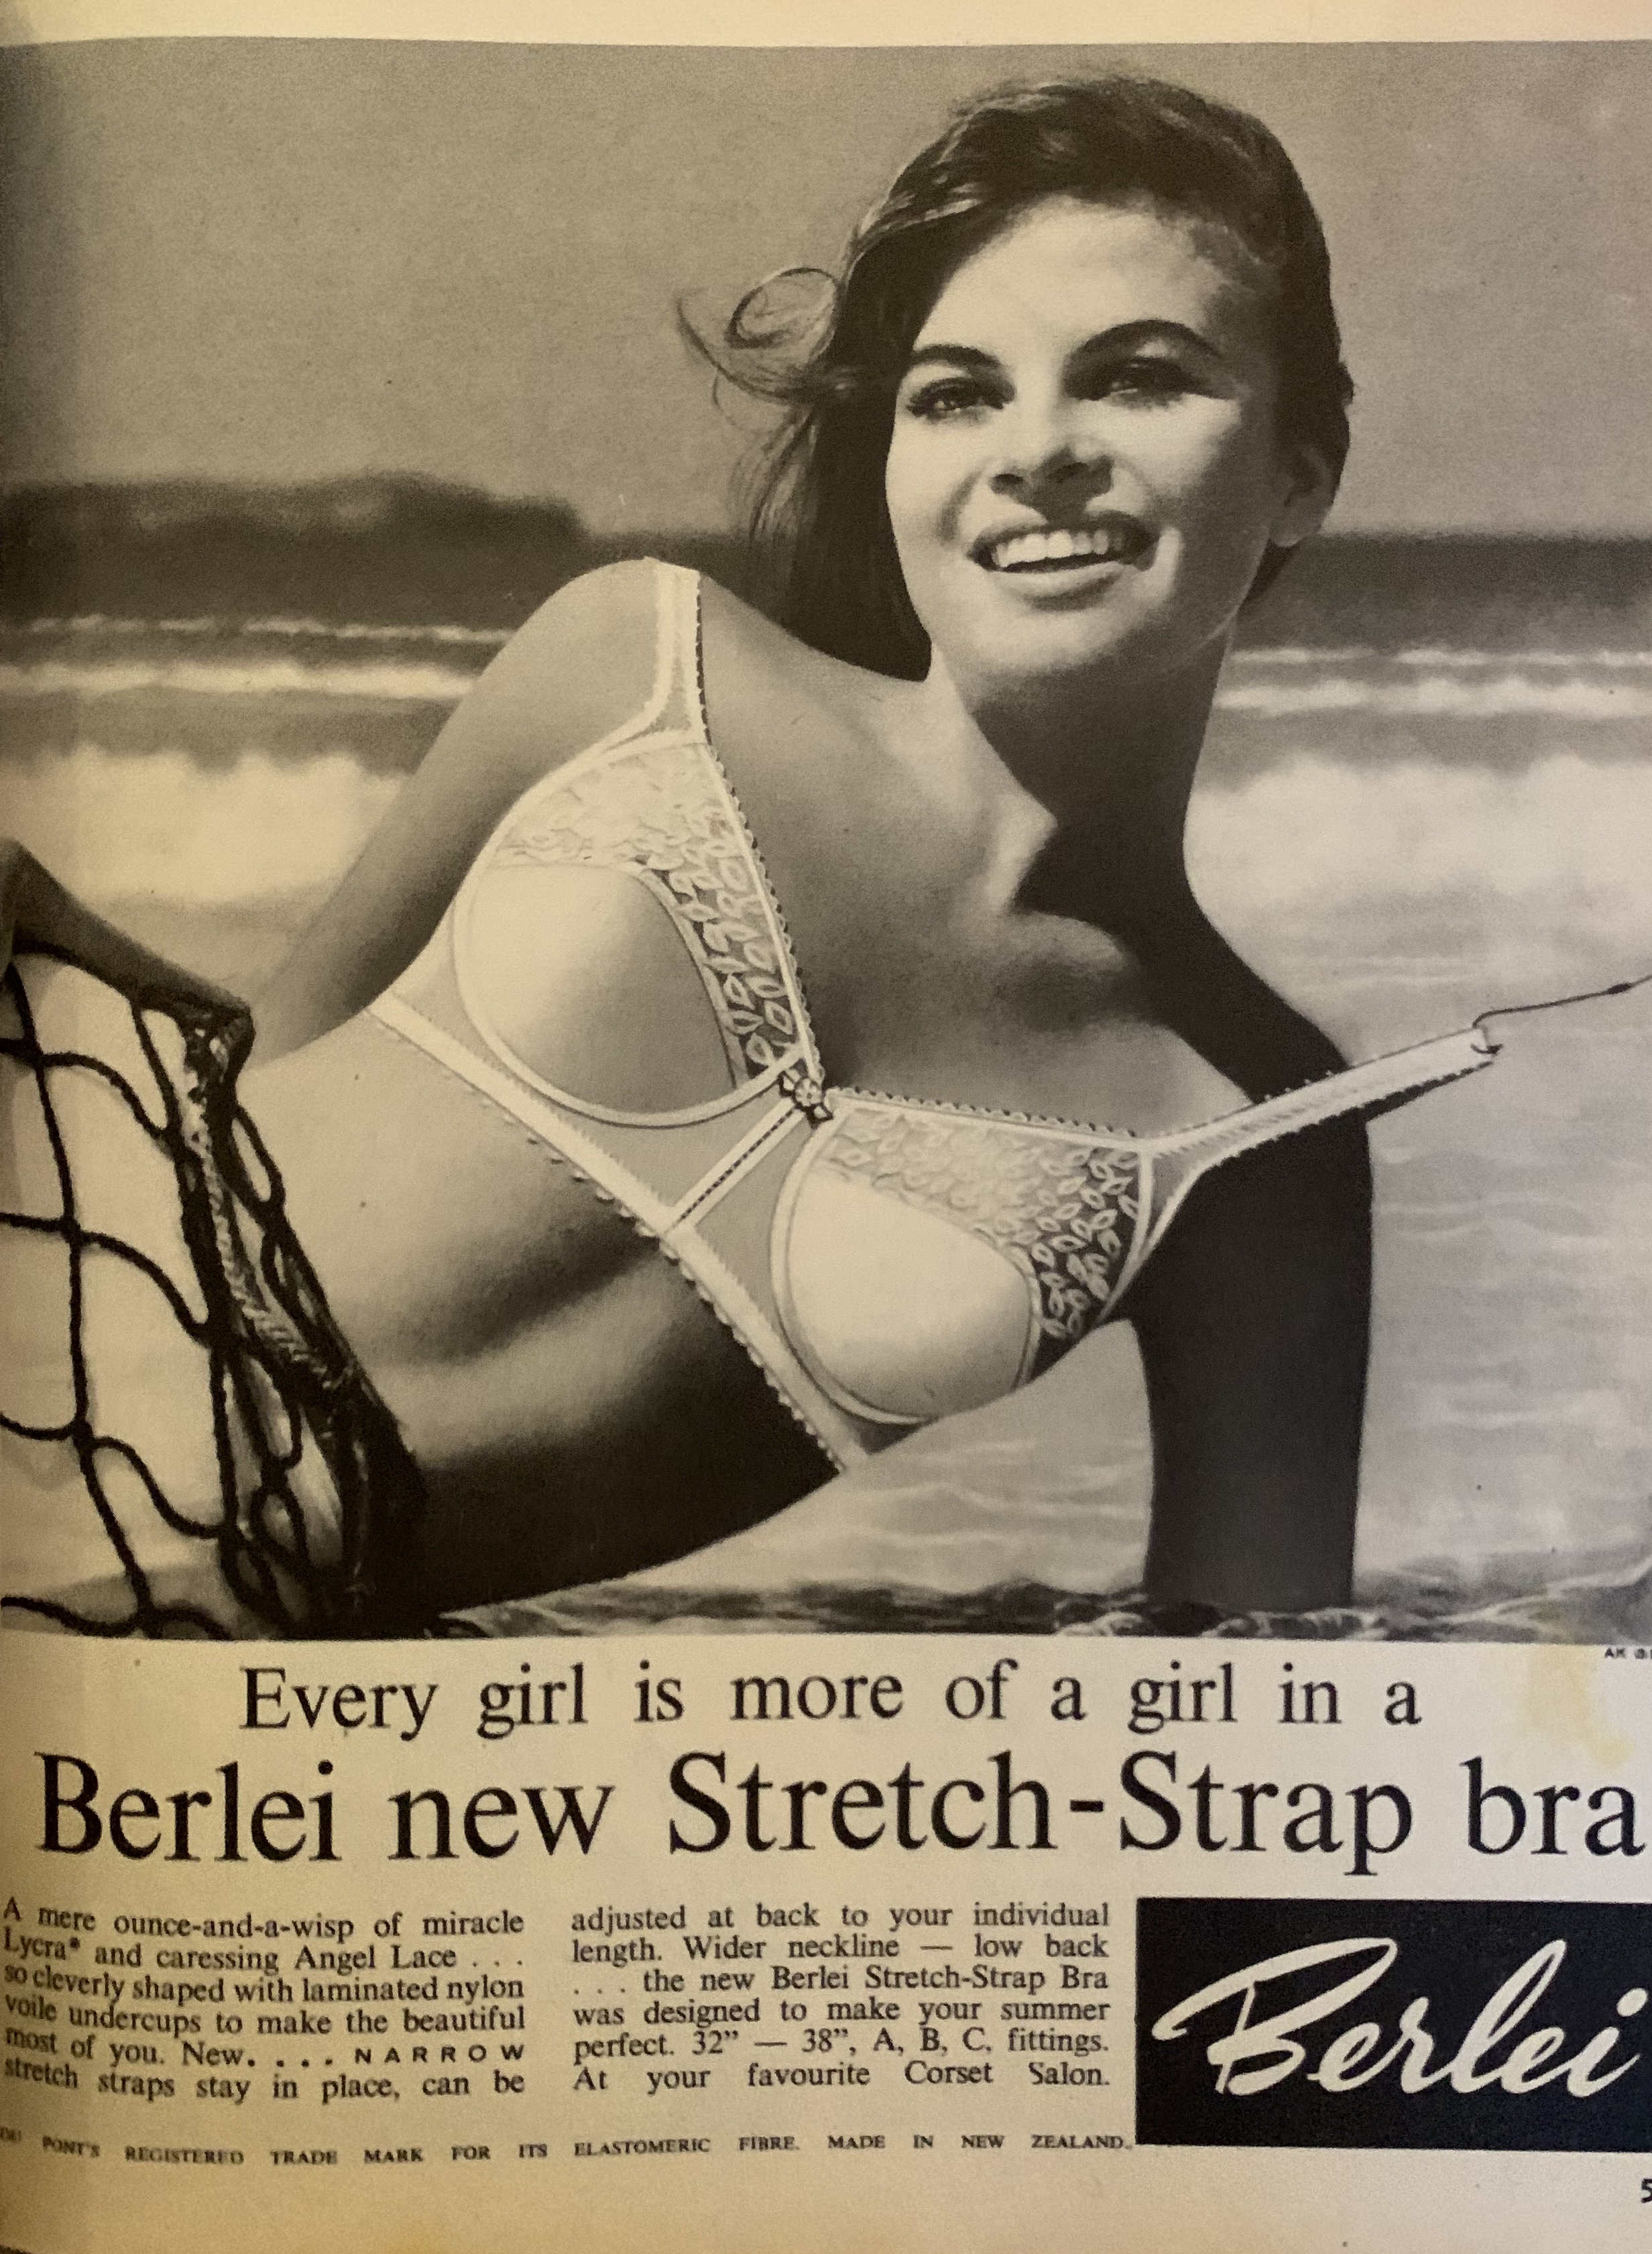 70s Fashion on X: How to be more of a girl 🤔 @BerleiUK #1970s #fashion  #lingerie #brassiere  / X